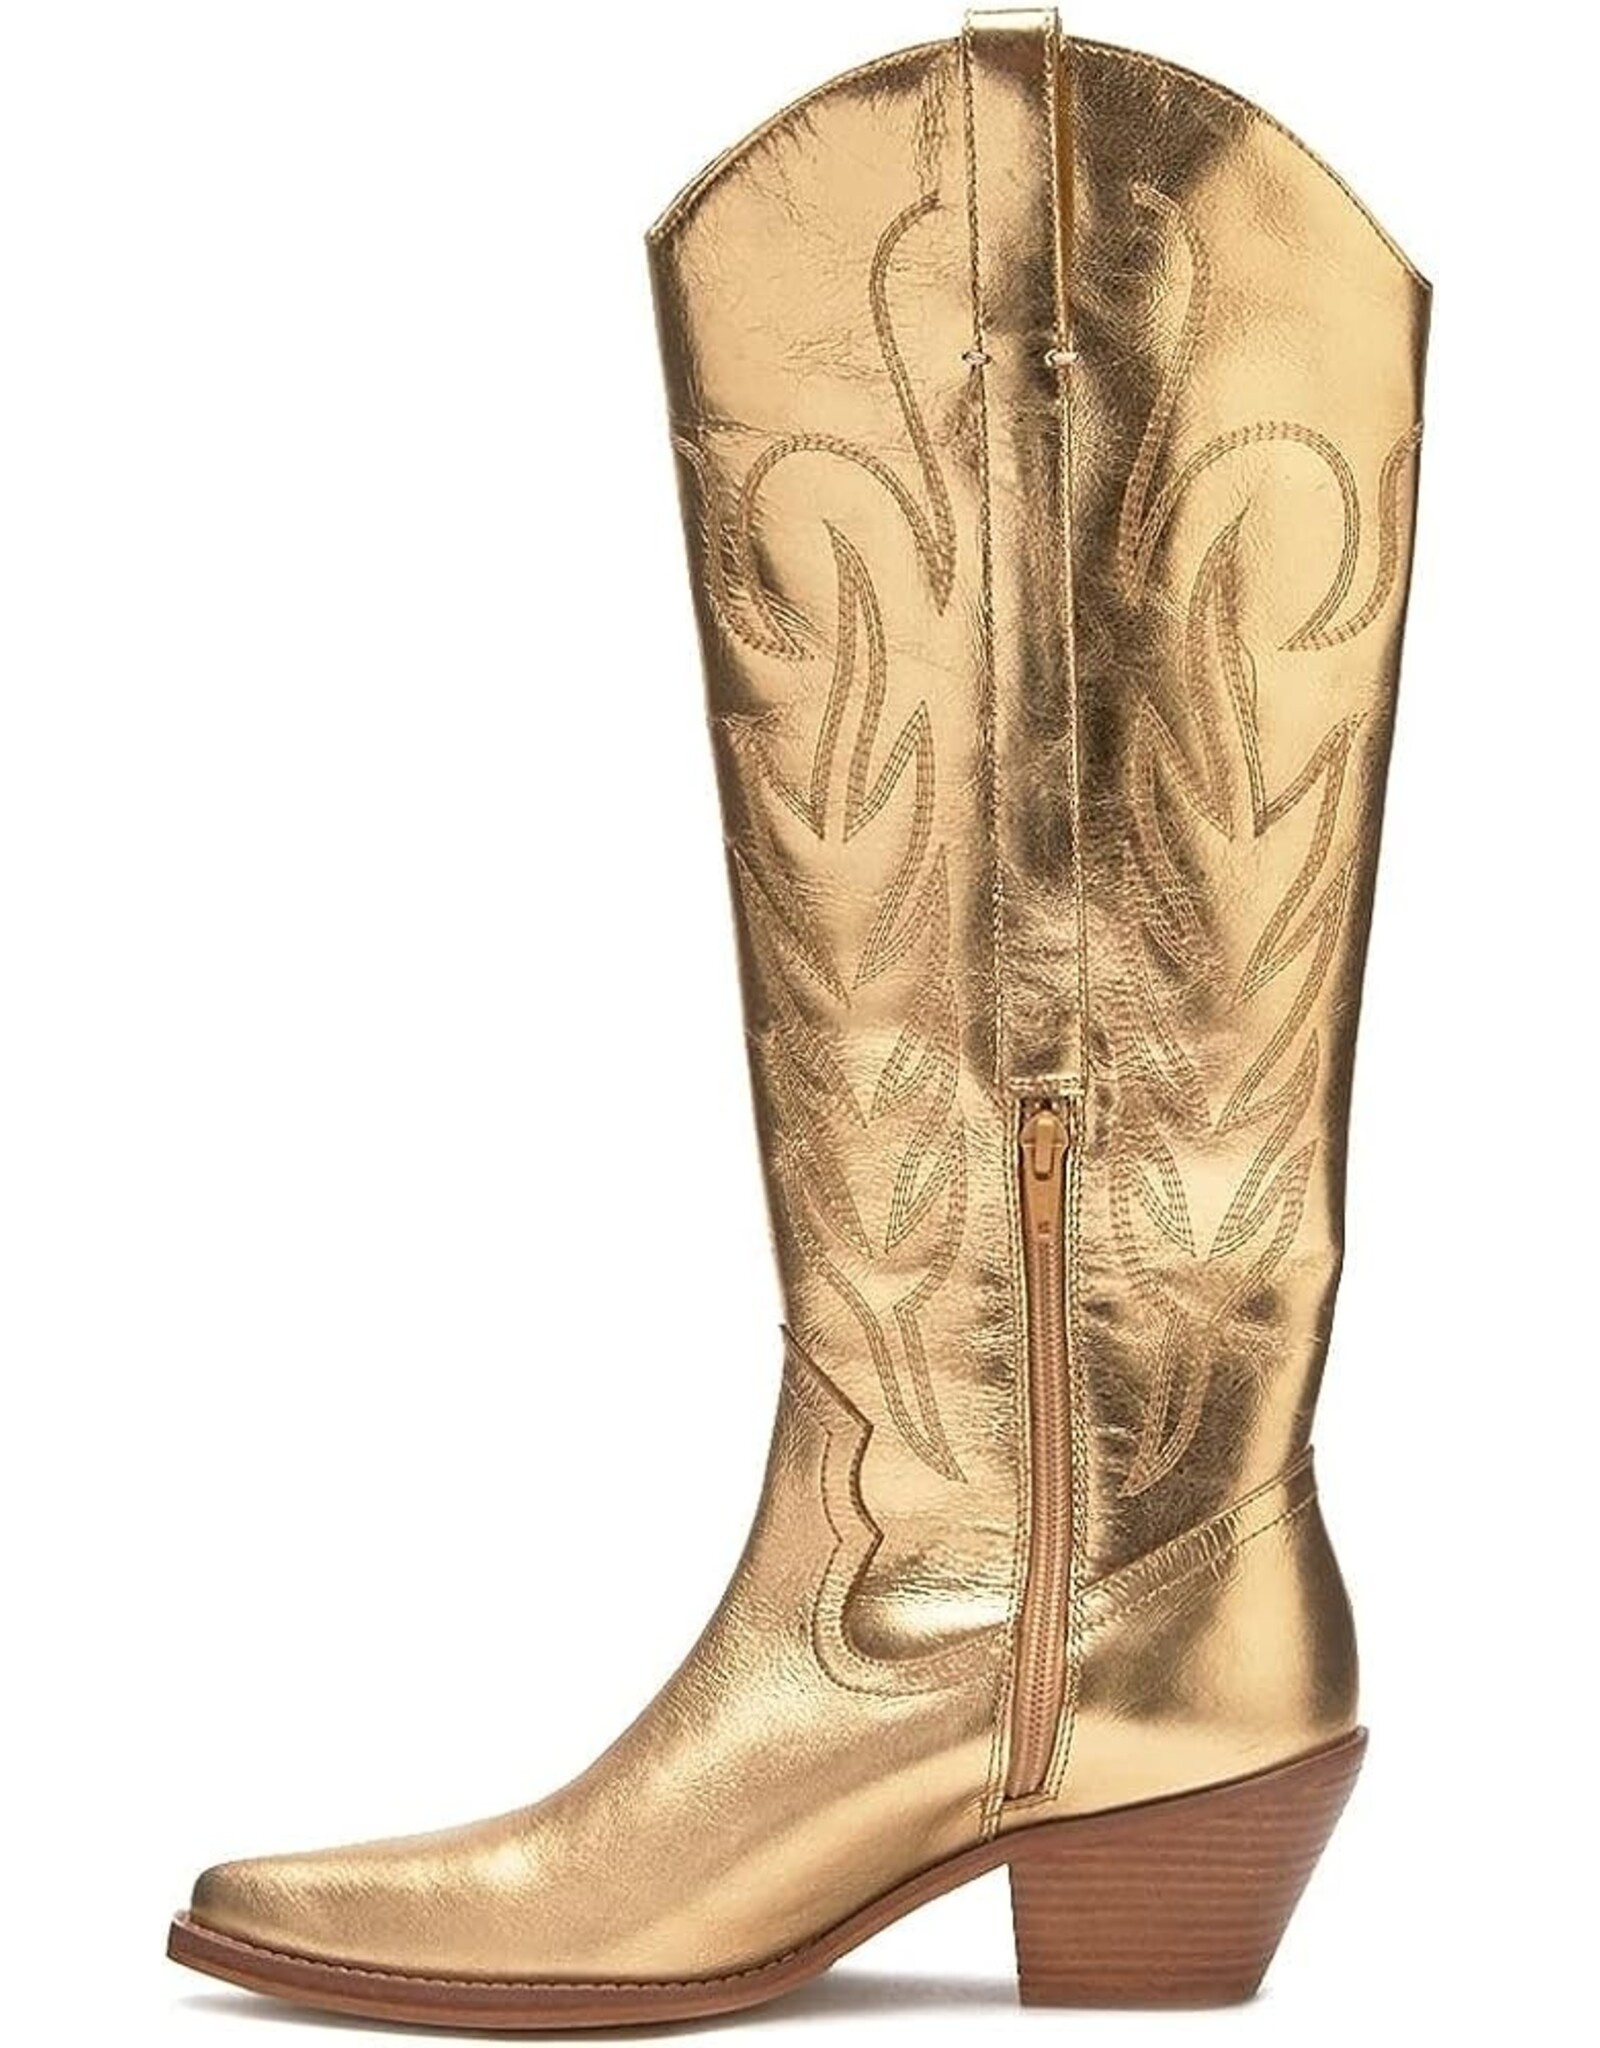 Agency Boots - Gold